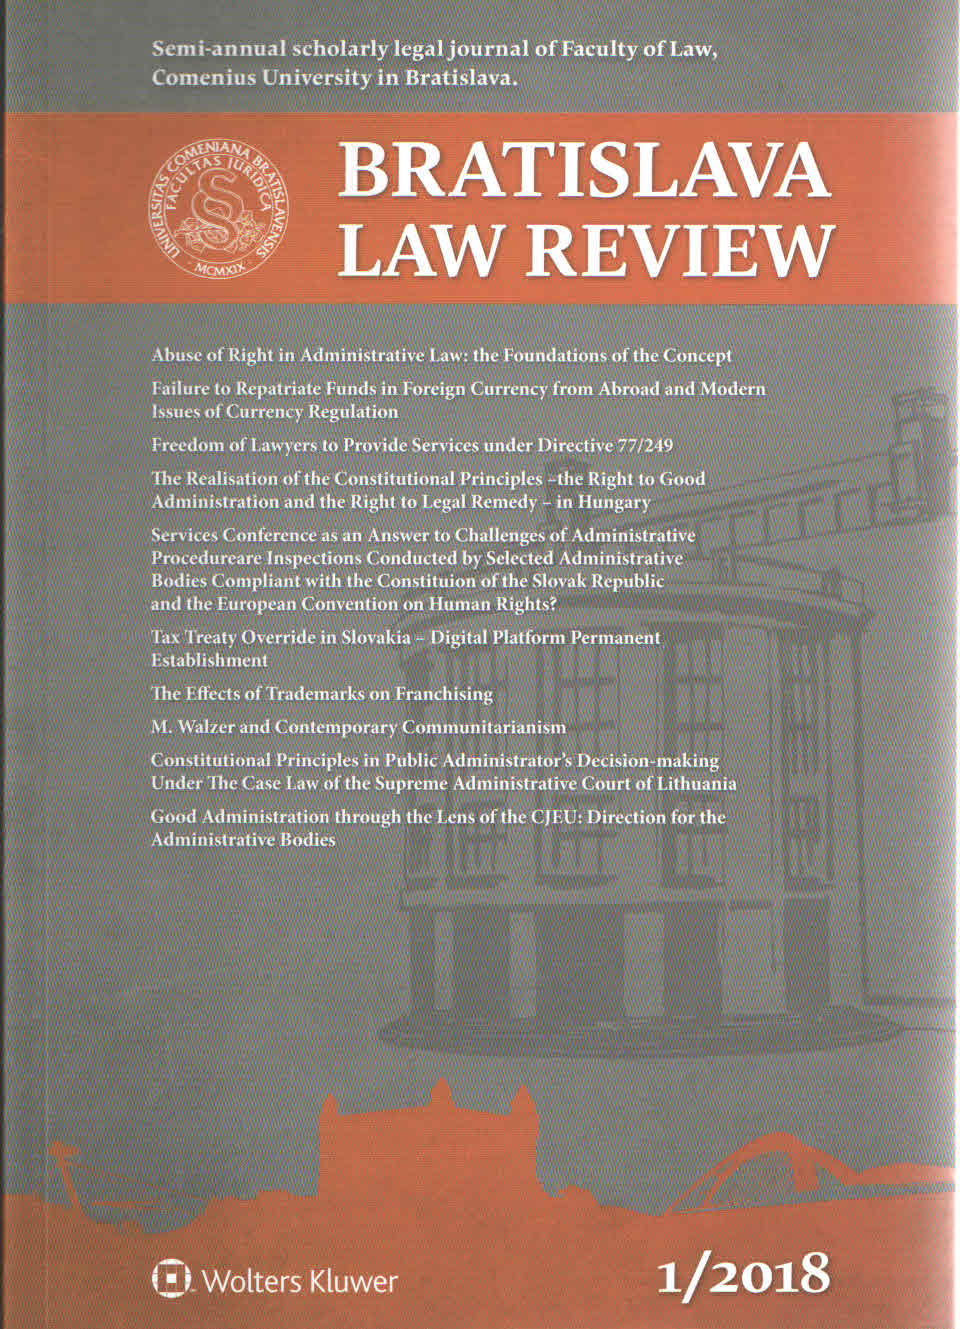 ABUSE OF RIGHT IN ADMINISTRATIVE LAW : THE FOUNDATIONS OF THE CONCEPT